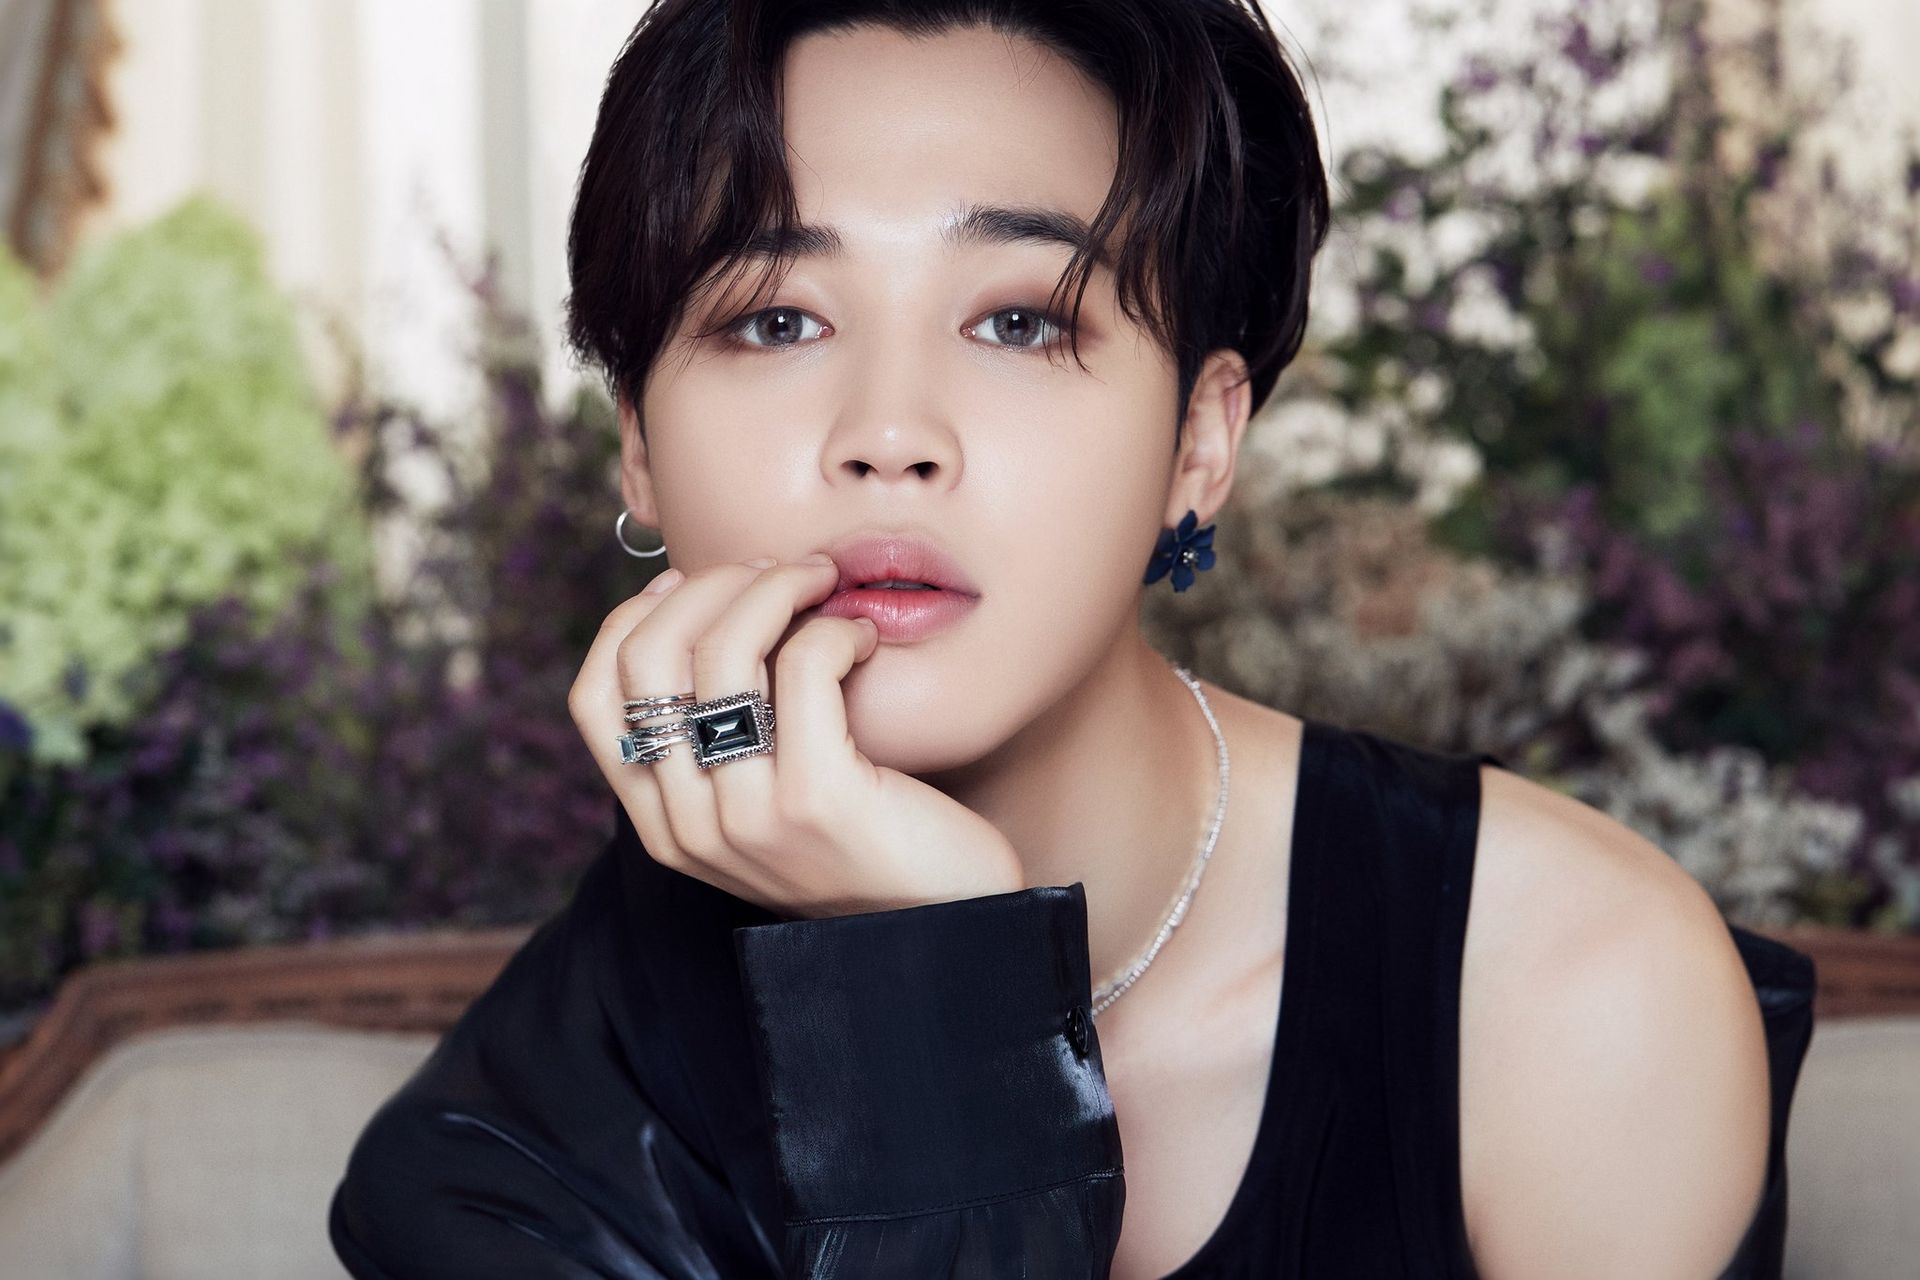 BTS Jimin phone number revealed: How to connect with your favorite star ...